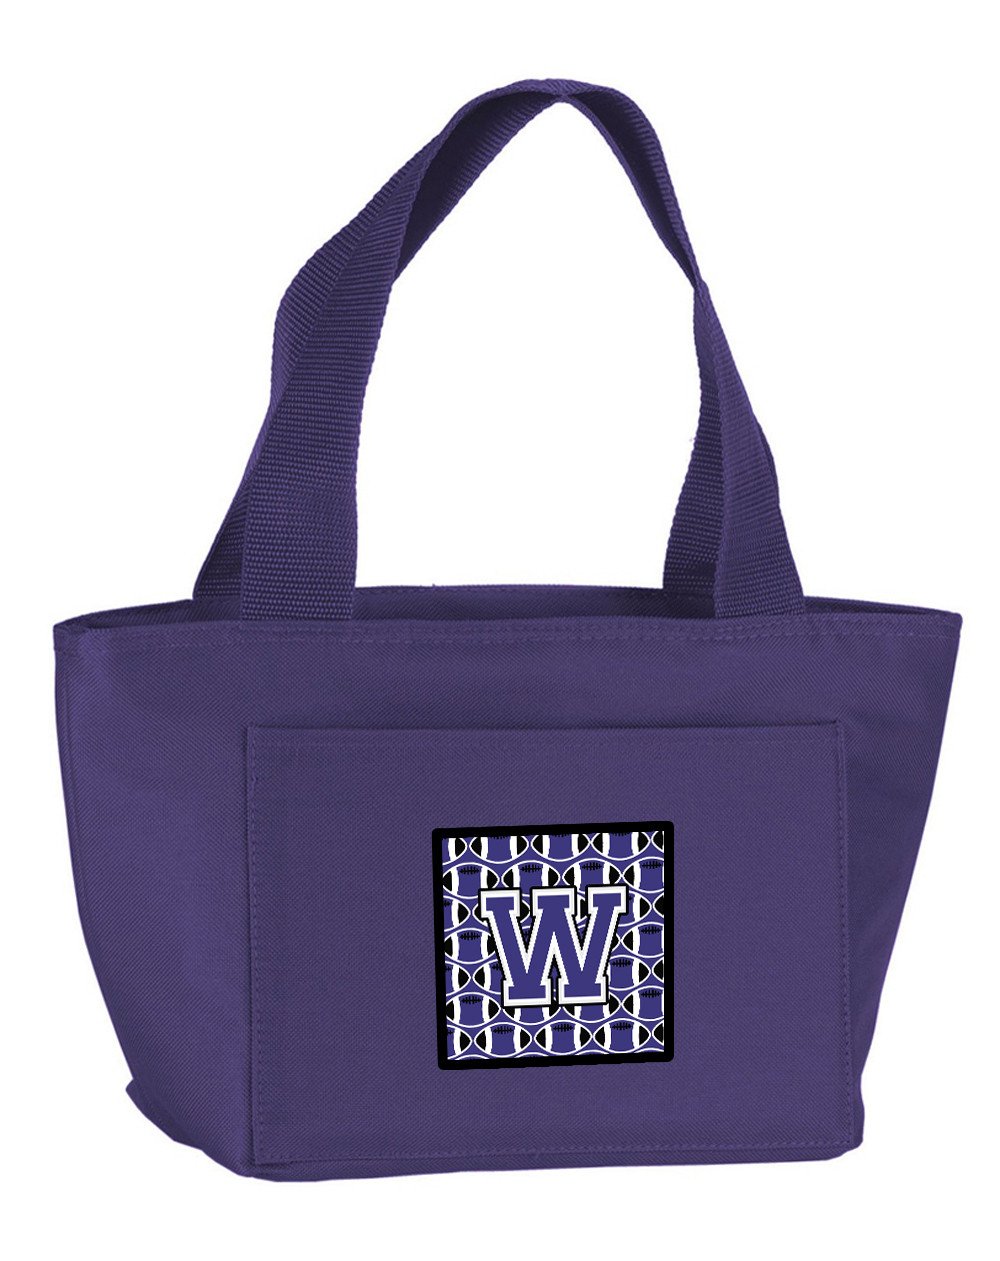 Letter W Football Purple and White Lunch Bag CJ1068-WPR-8808 by Caroline's Treasures